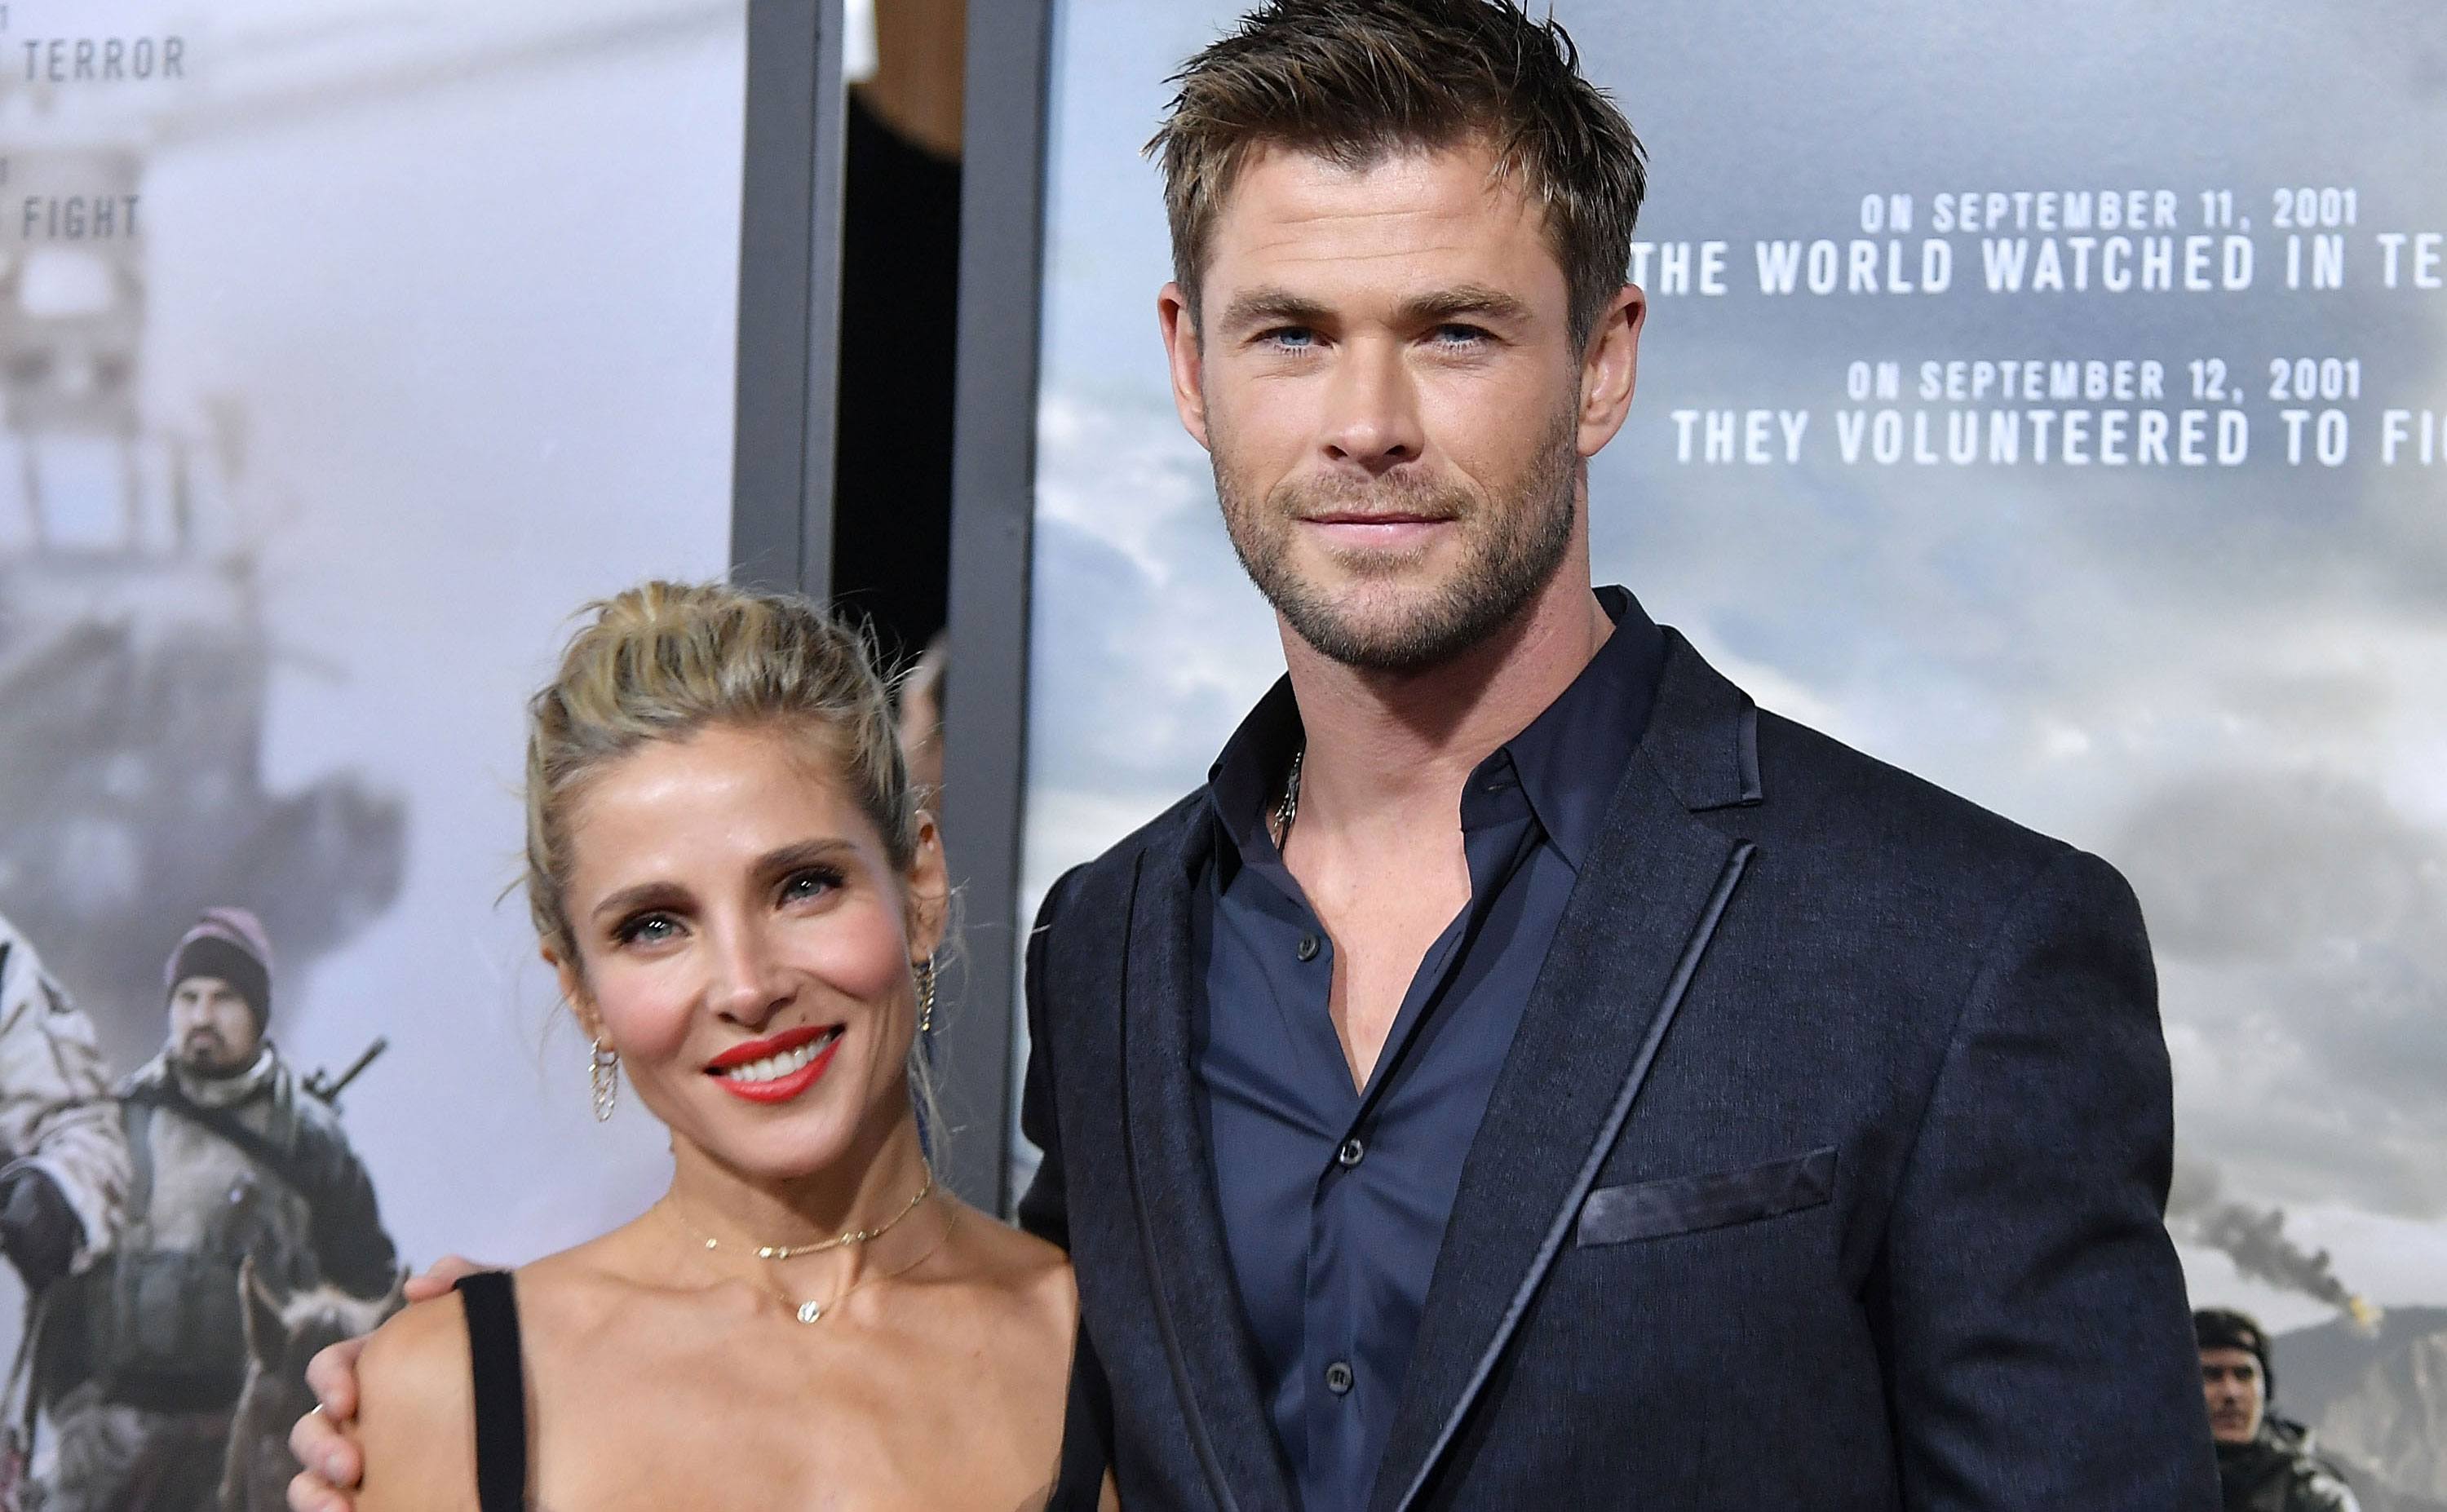 Elsa and Chris at the movie premiere.